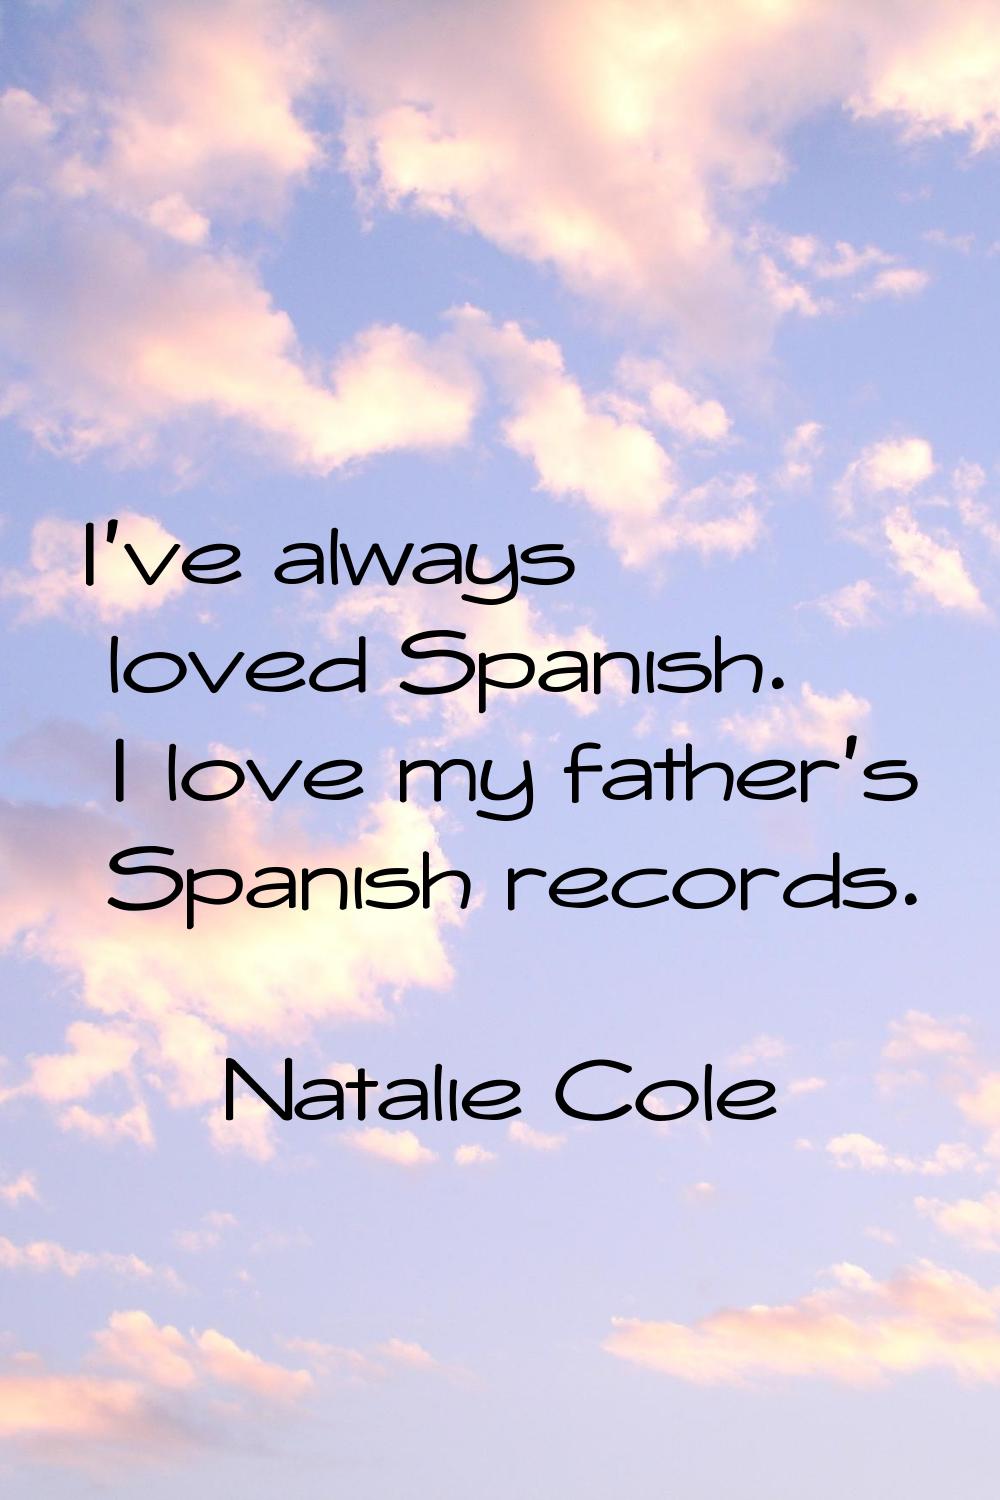 I've always loved Spanish. I love my father's Spanish records.